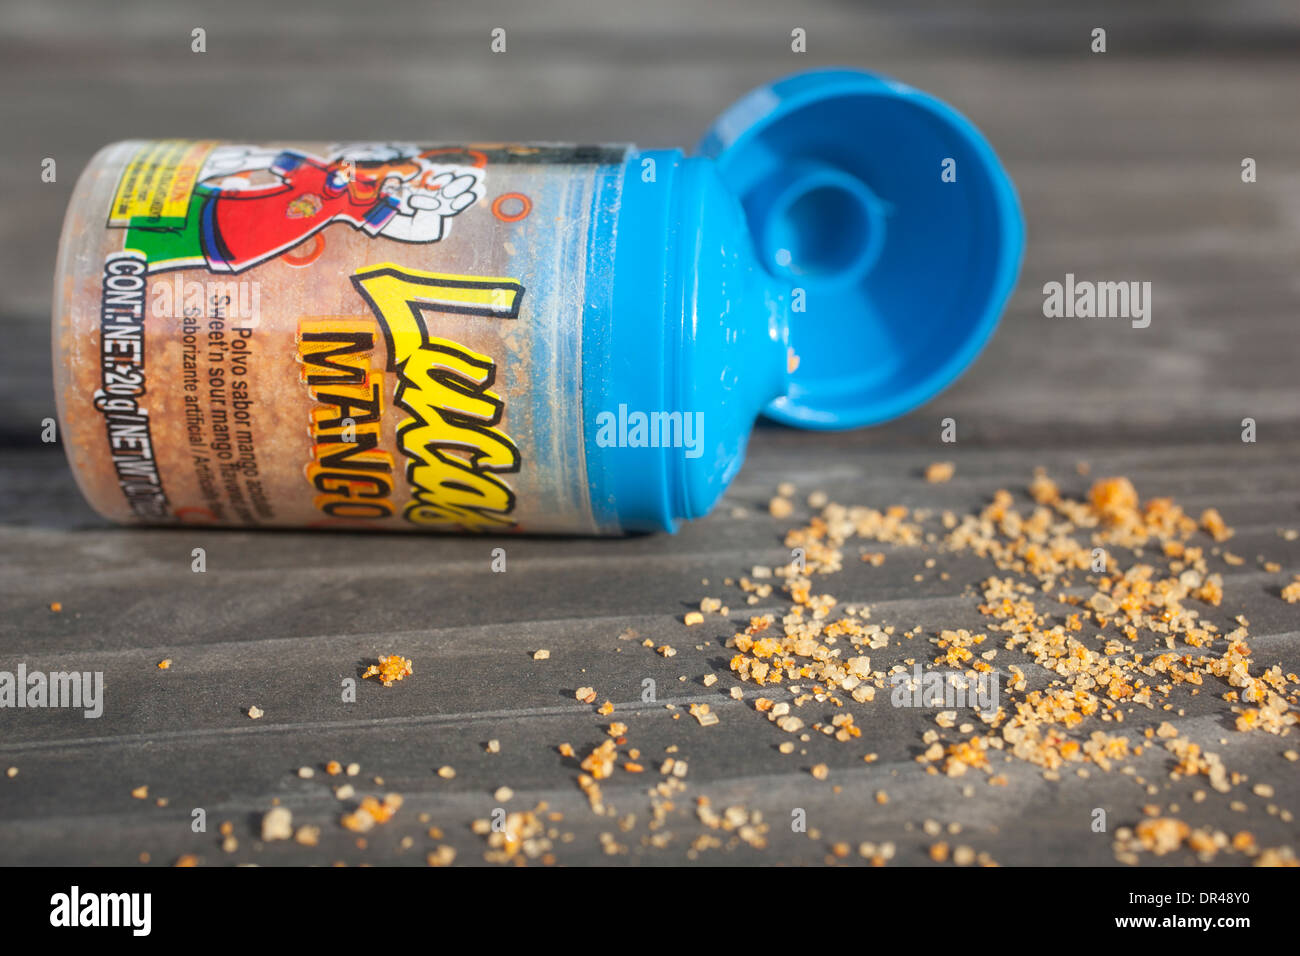 Lucas mango mexican candy powder spilled on table Stock Photo